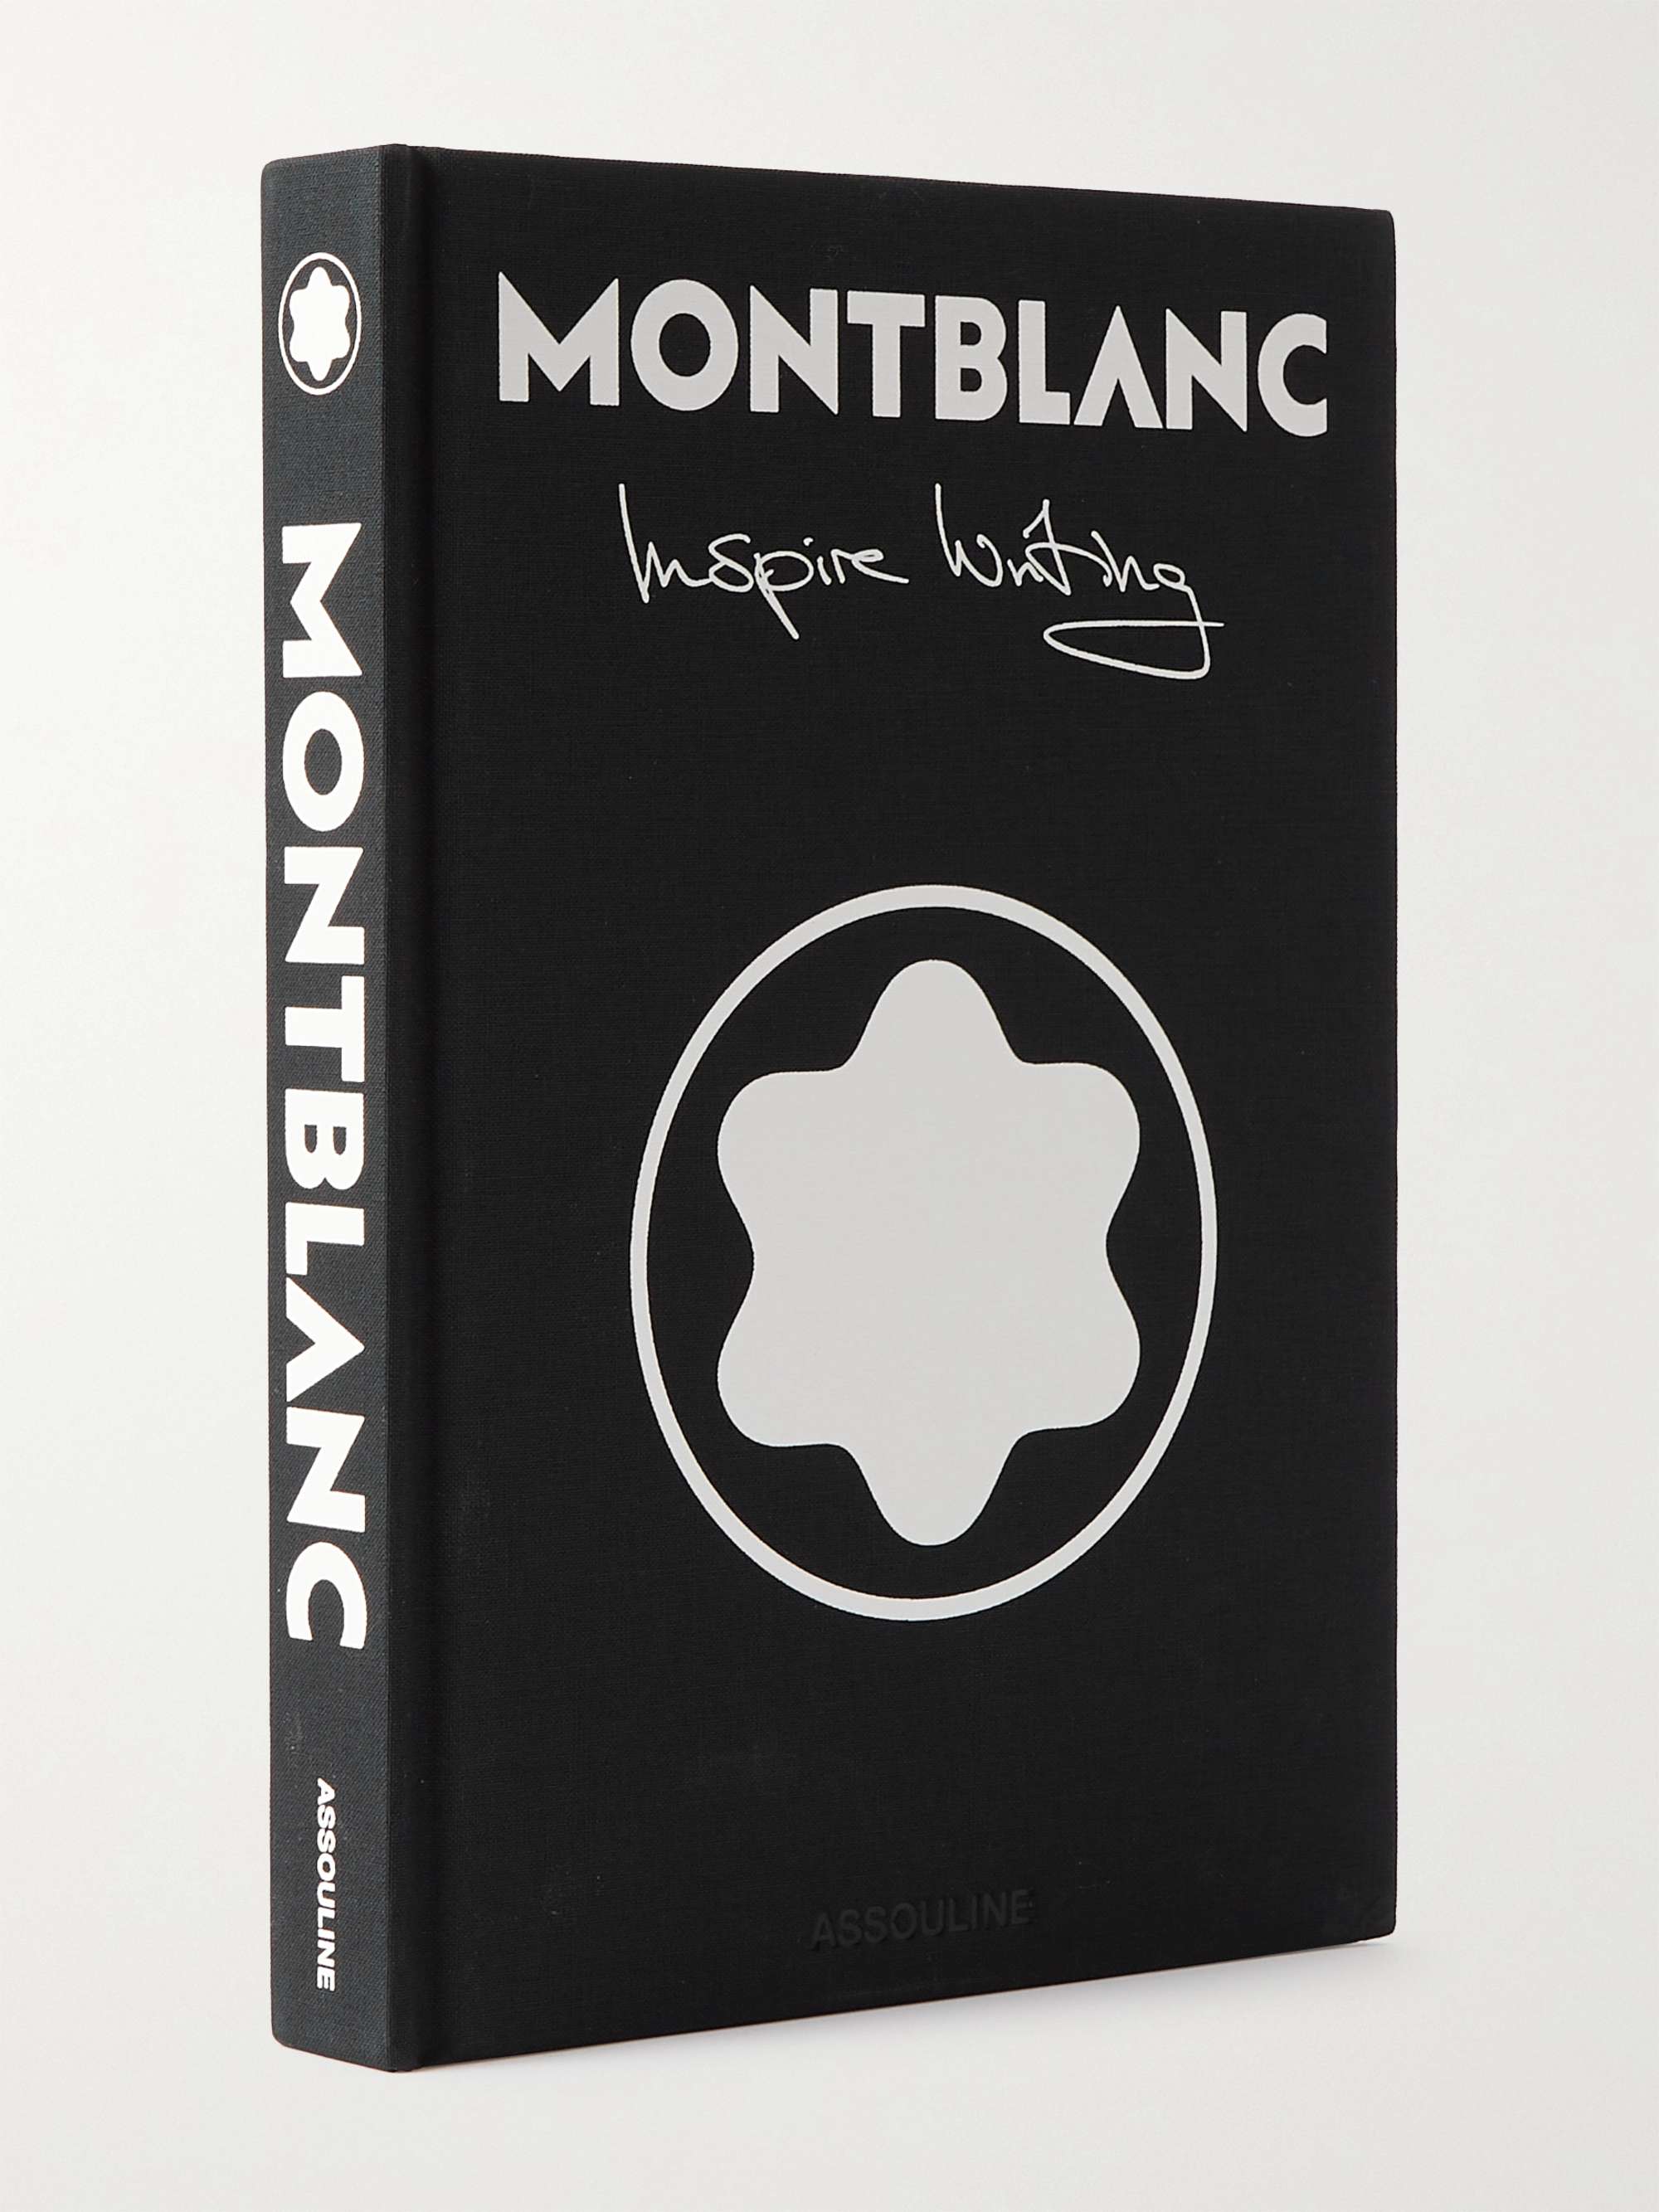 MONTBLANC Montblanc: Inspire Writing Hardcover Book